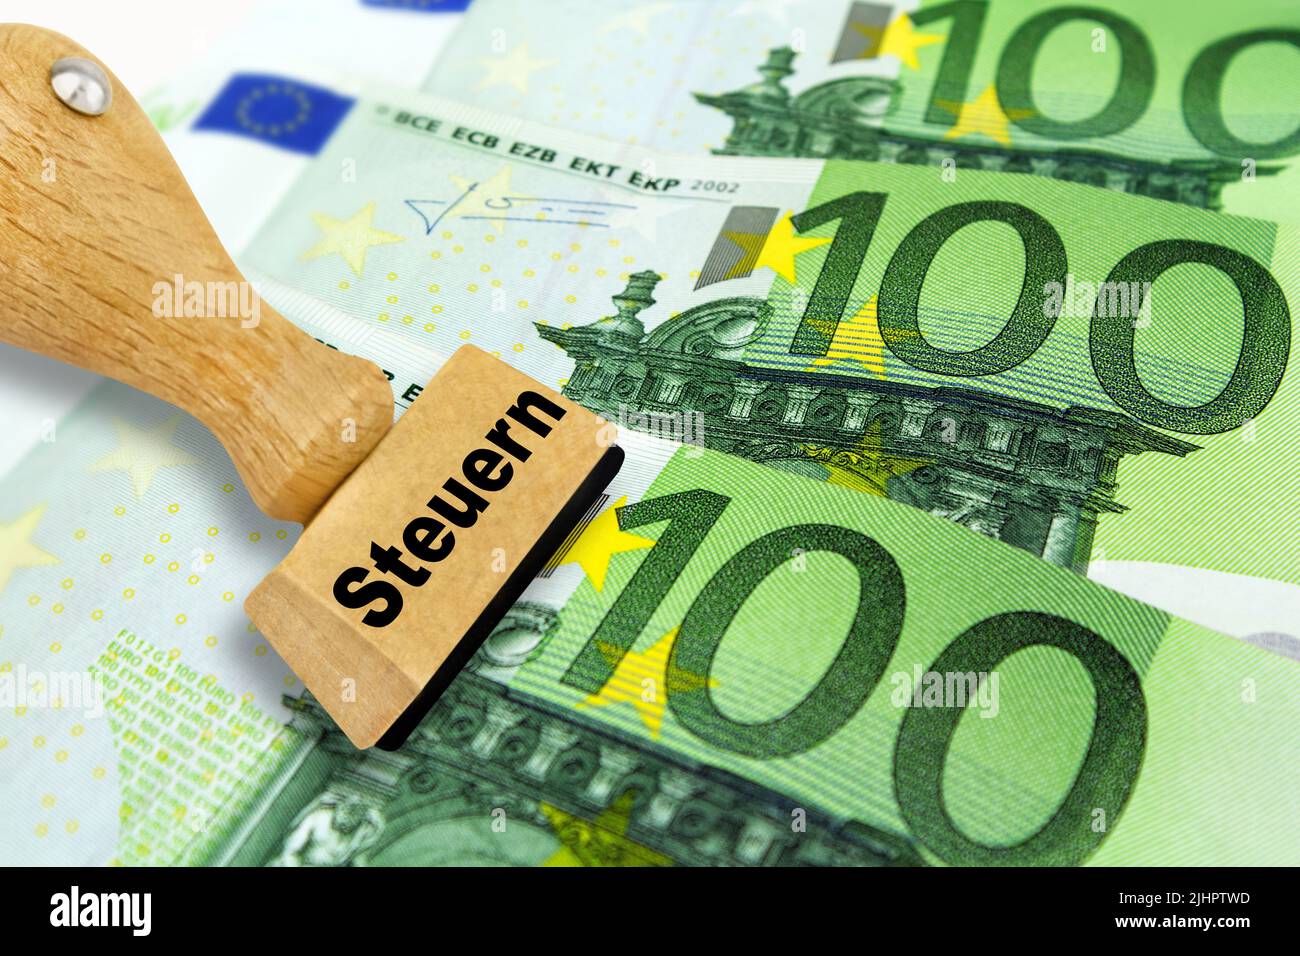 Energy and Finances with German stamp taxes Stock Photo